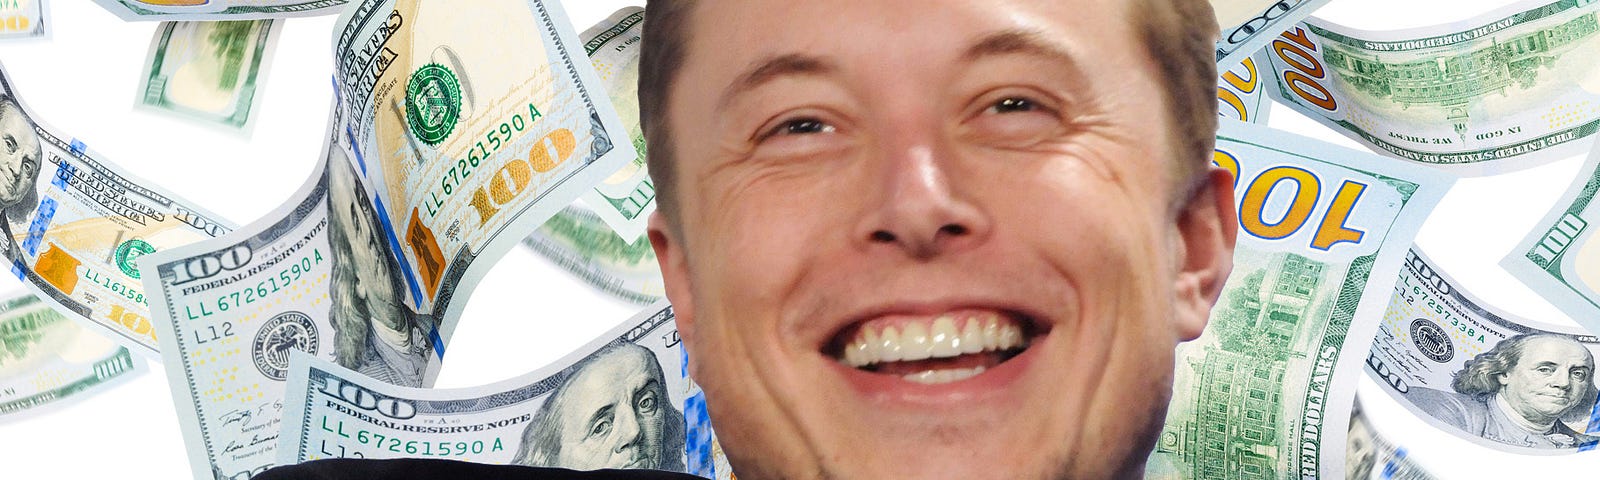 Photo of Elon Musk on a background of $100 bills